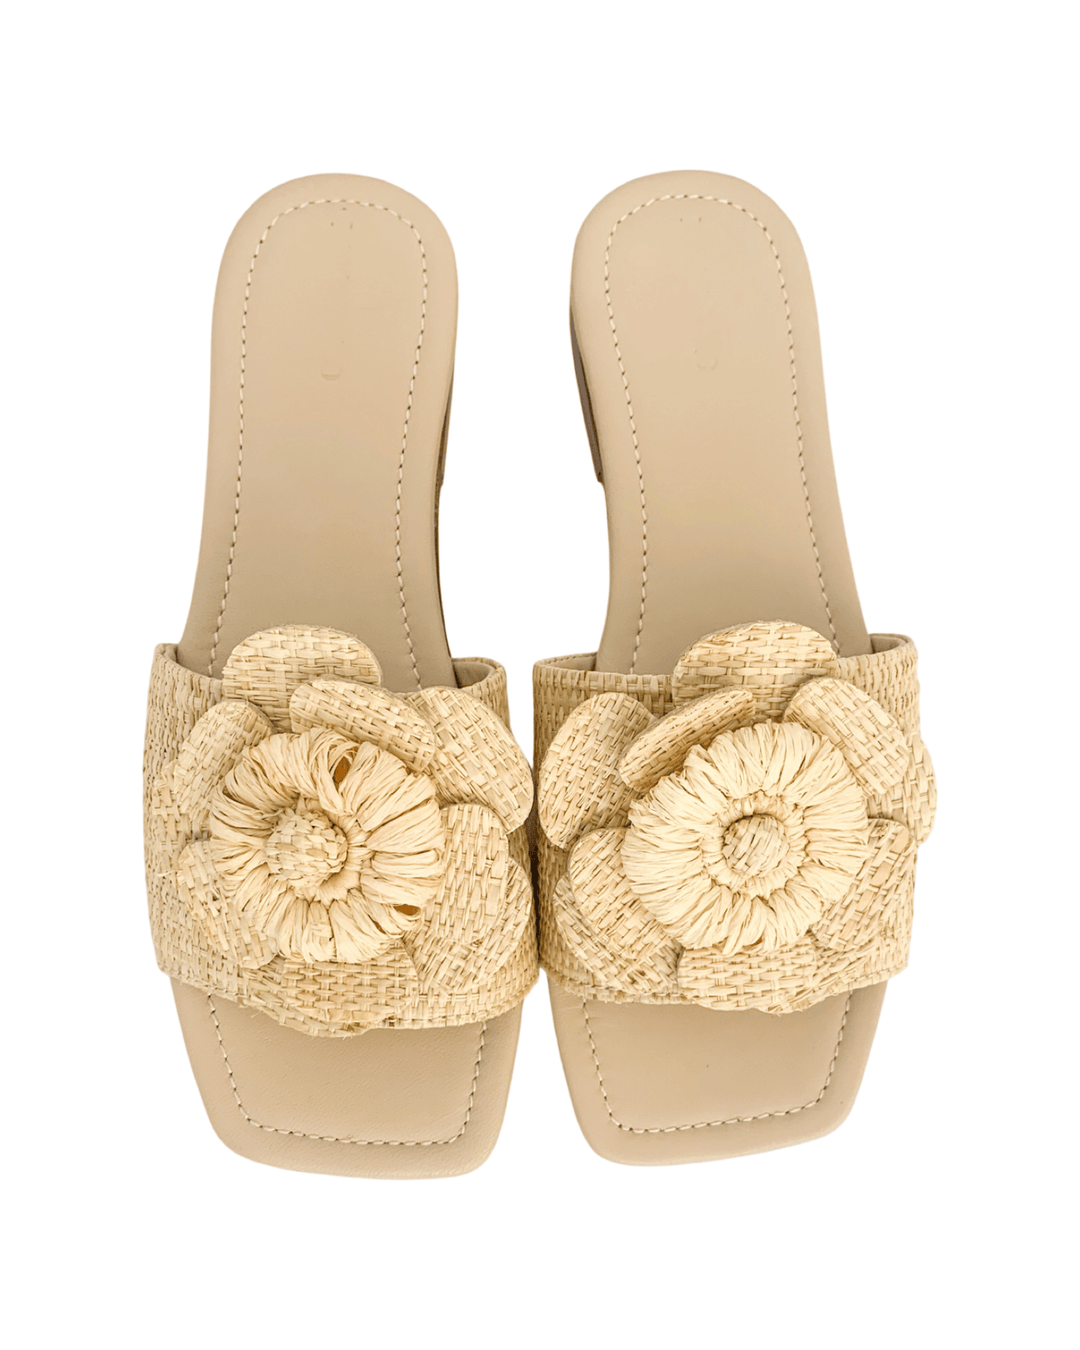 beau-ro-bag-company-shoes-maroc-solo-flora-slide-in-natural-37164500680957_1080x.png